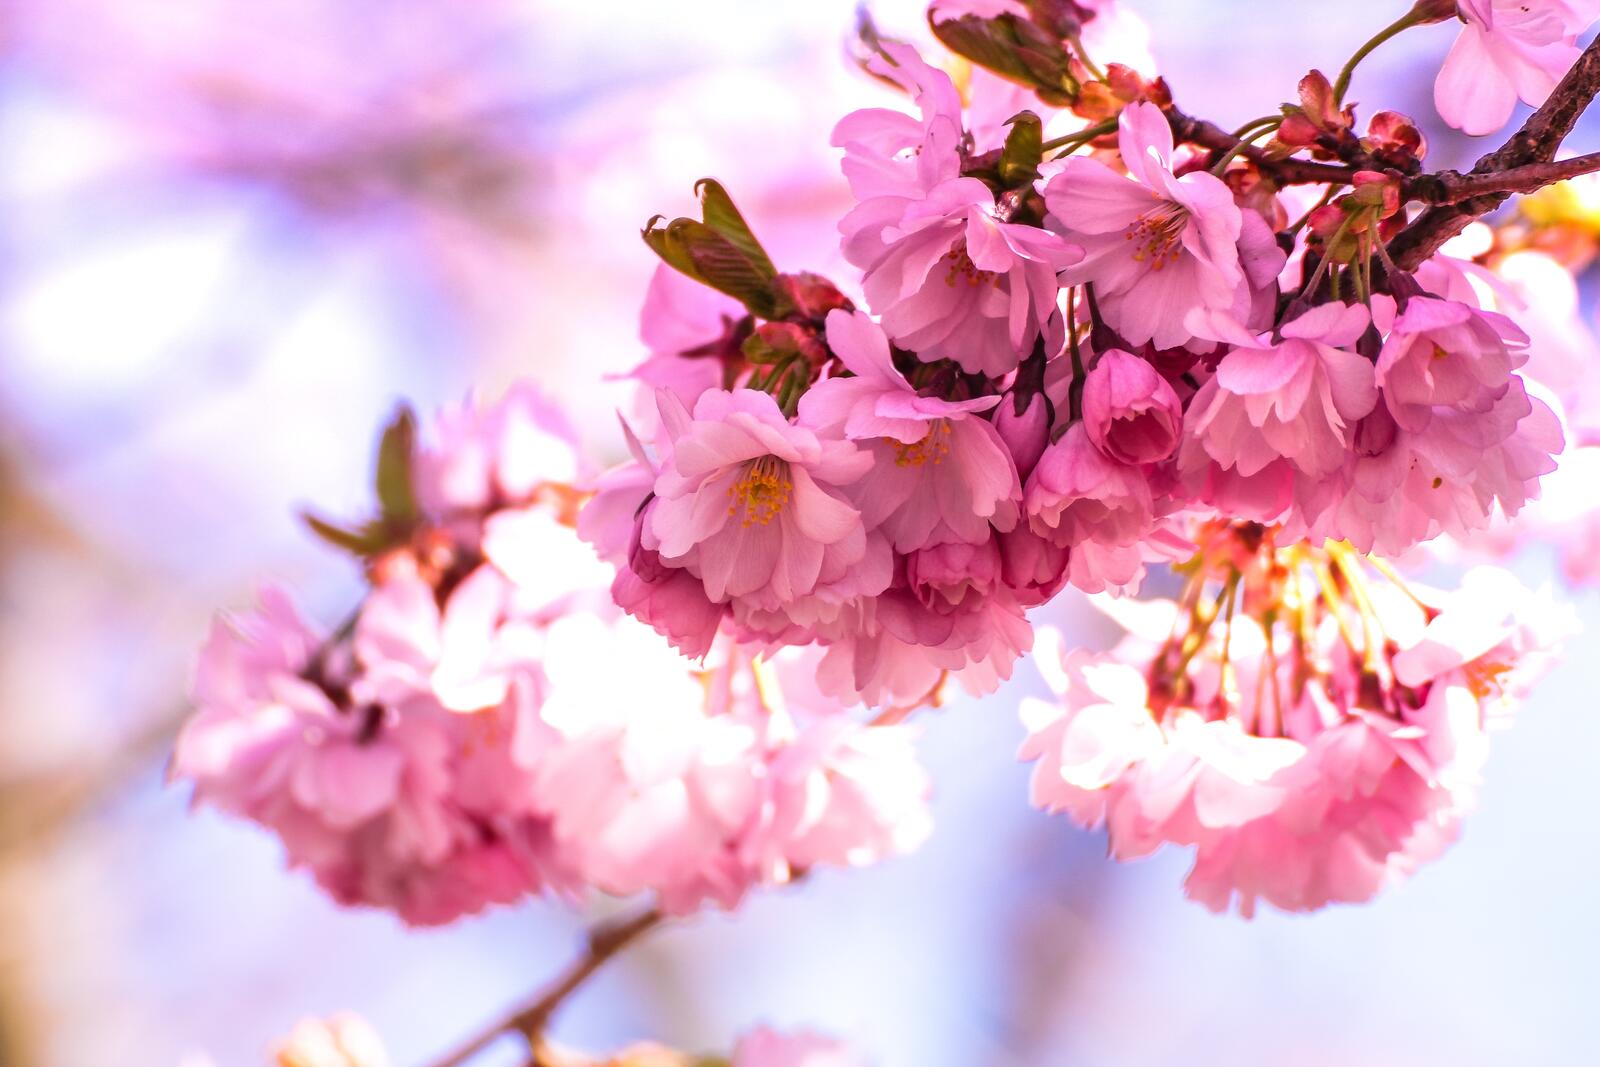 Free photo A sprig of cherry blossom with pink flowers